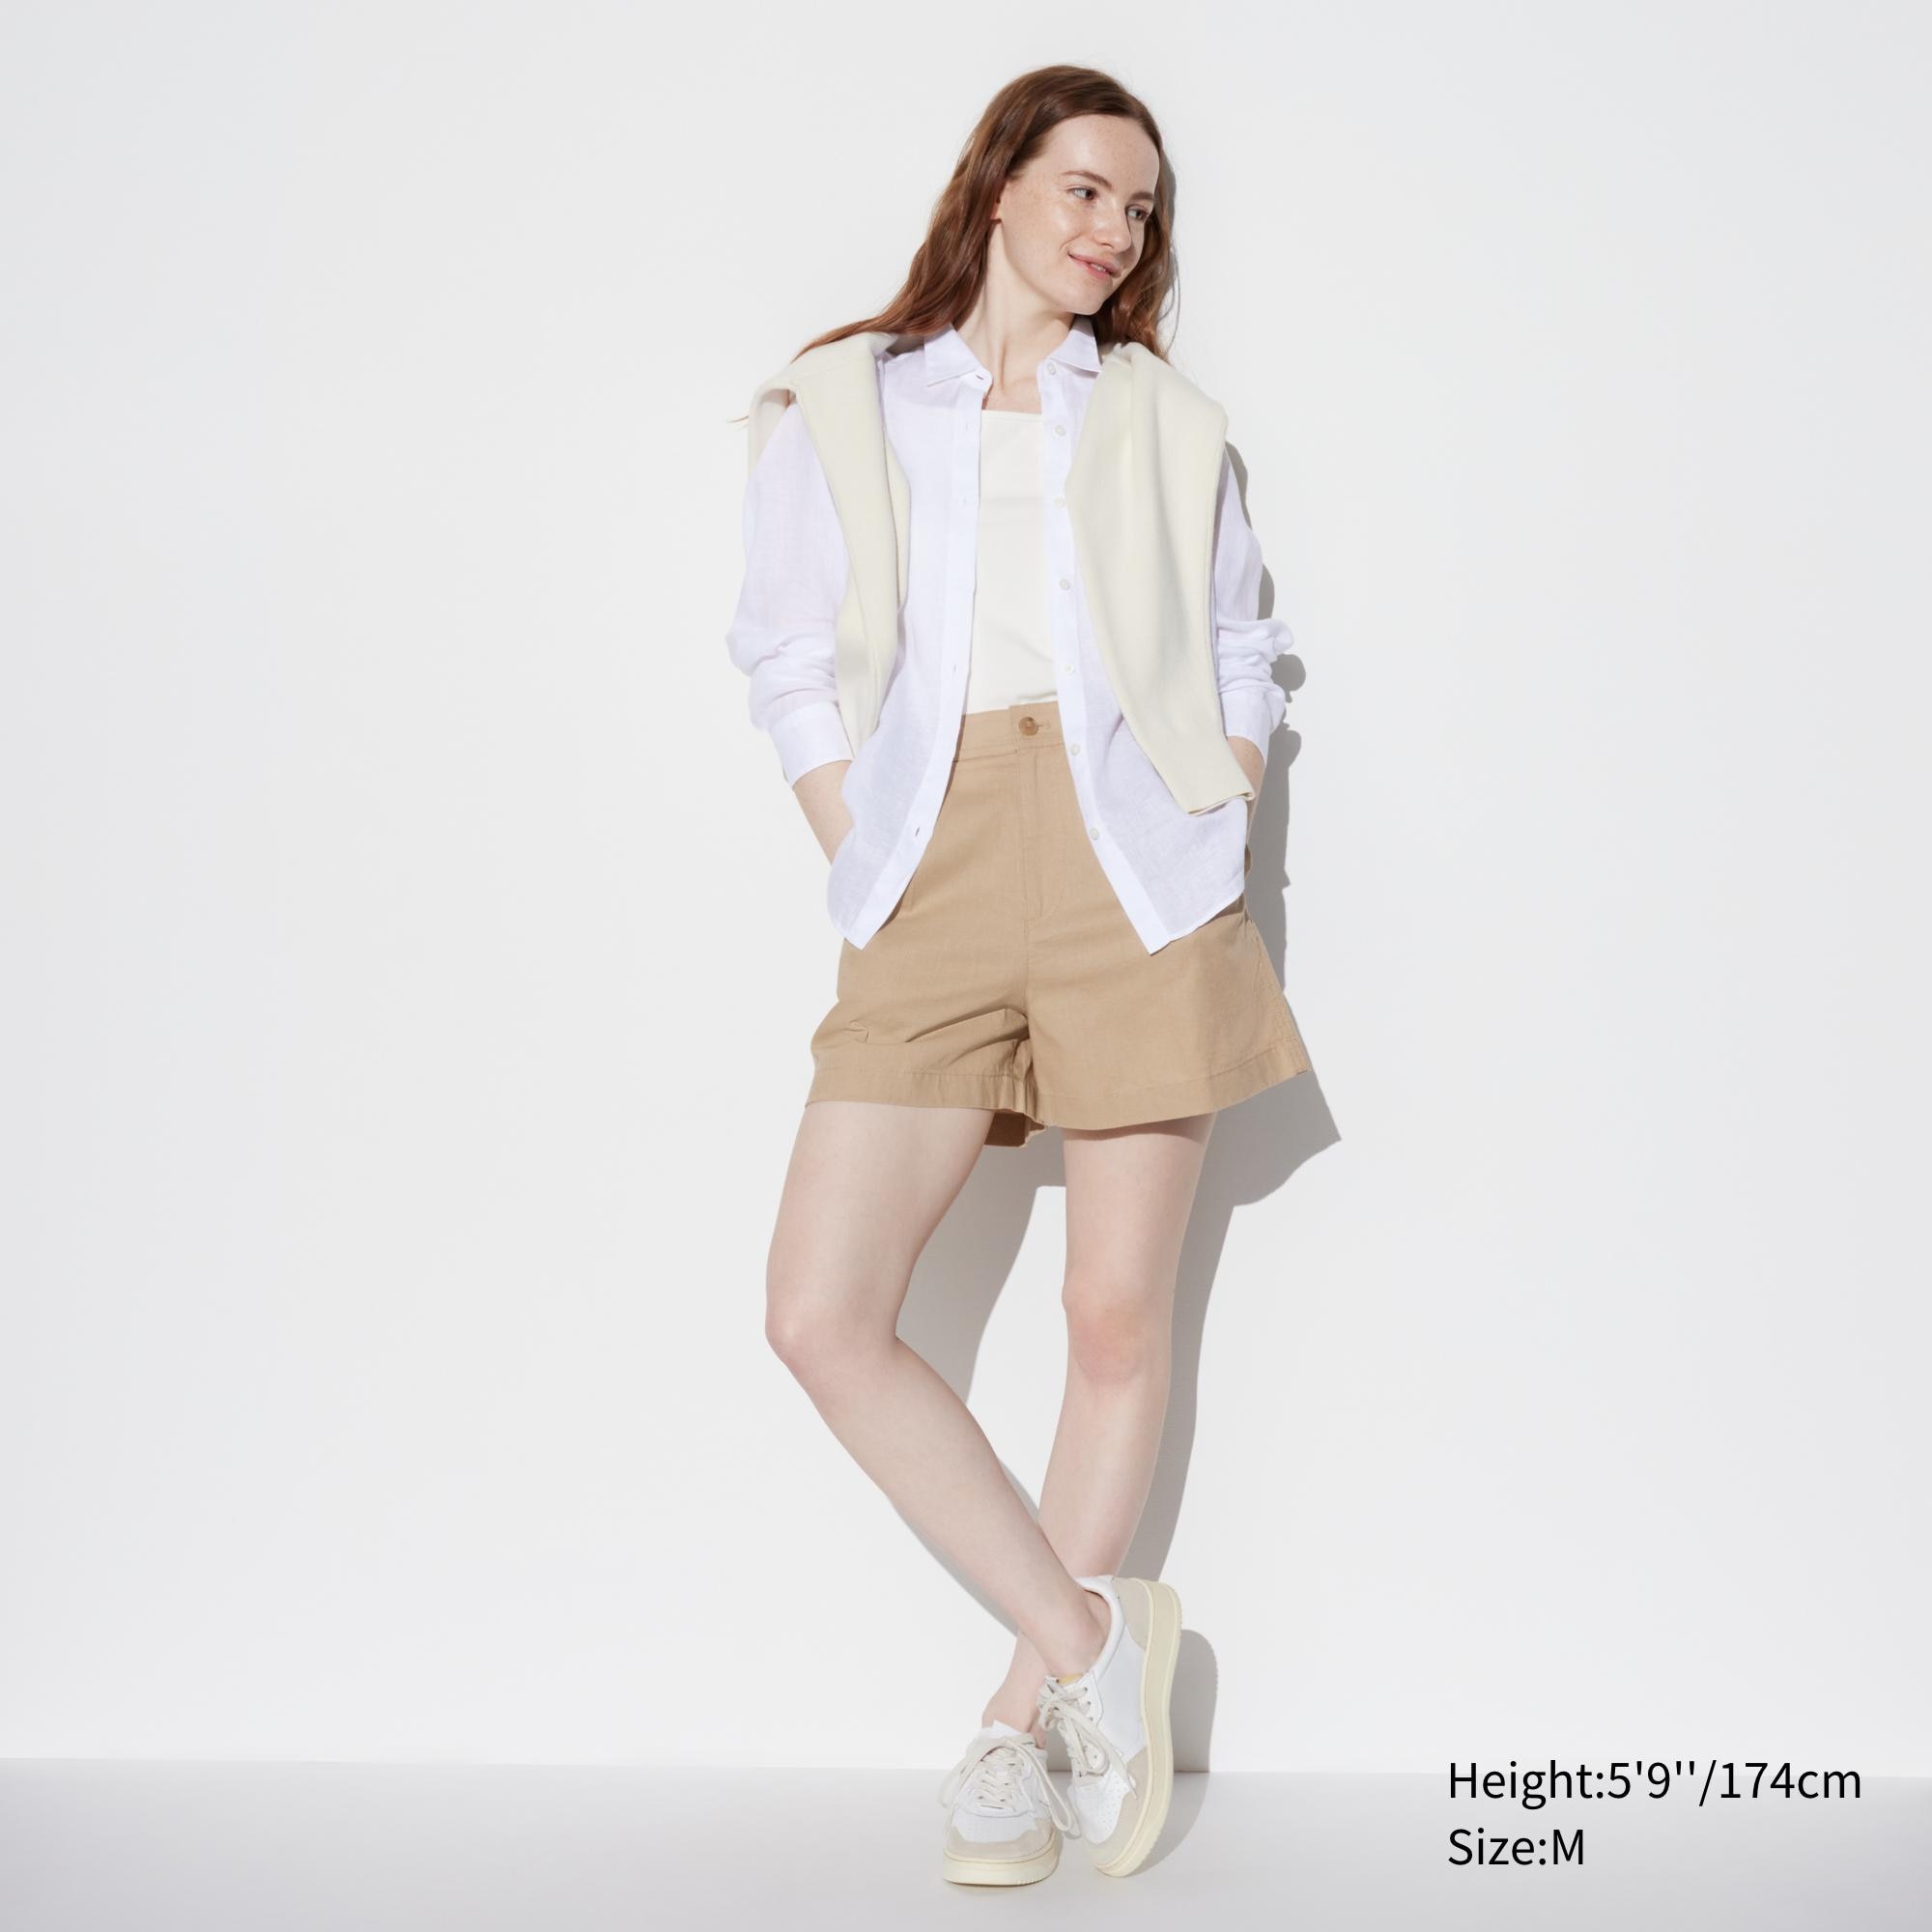 Check styling ideas for「Linen Cotton Shorts」